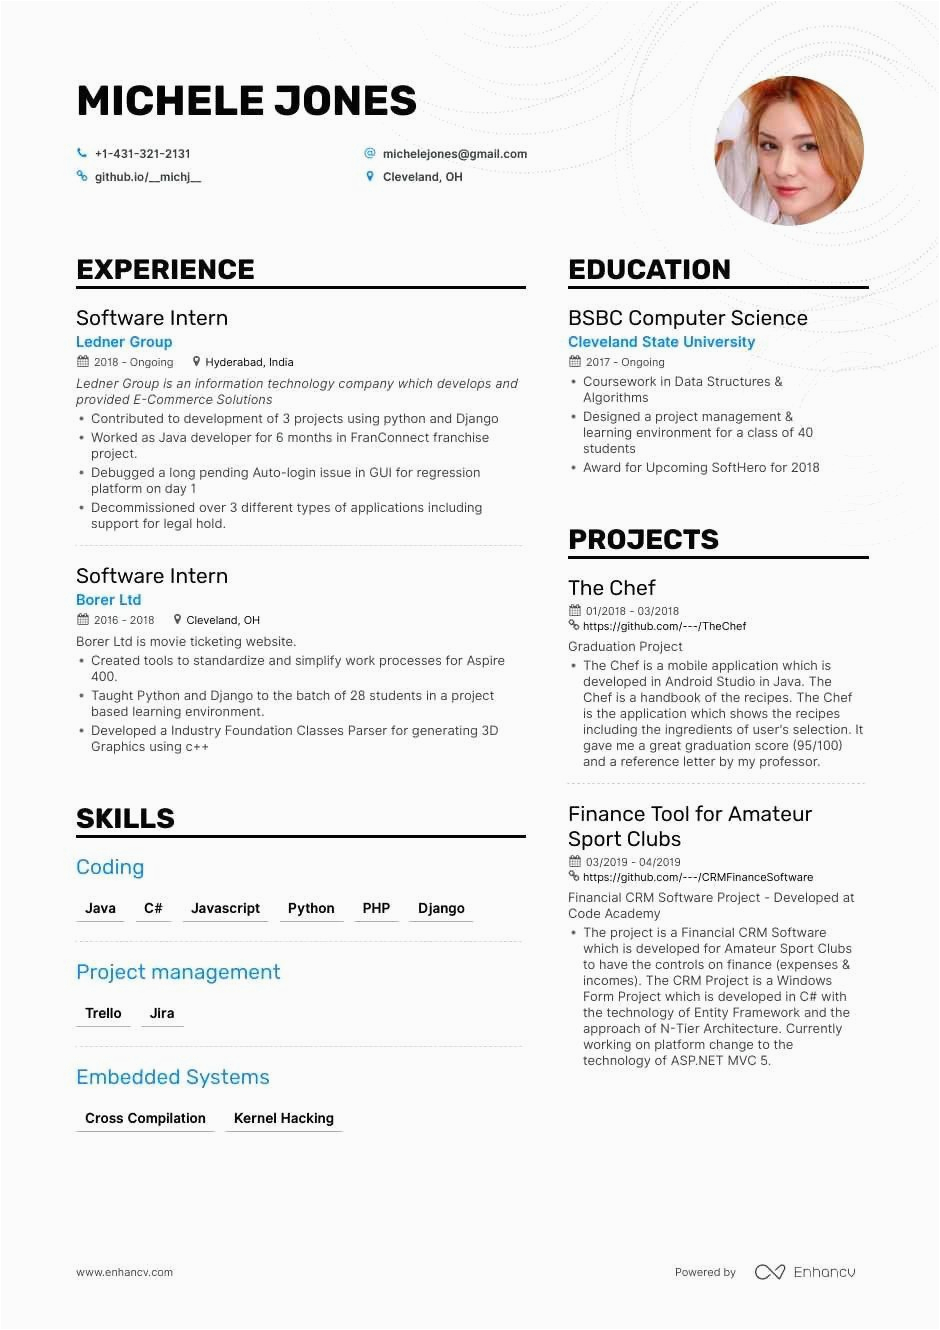 Software Engineer Sample Resume No Experience software Engineer Resume No Experience at Resume Examples